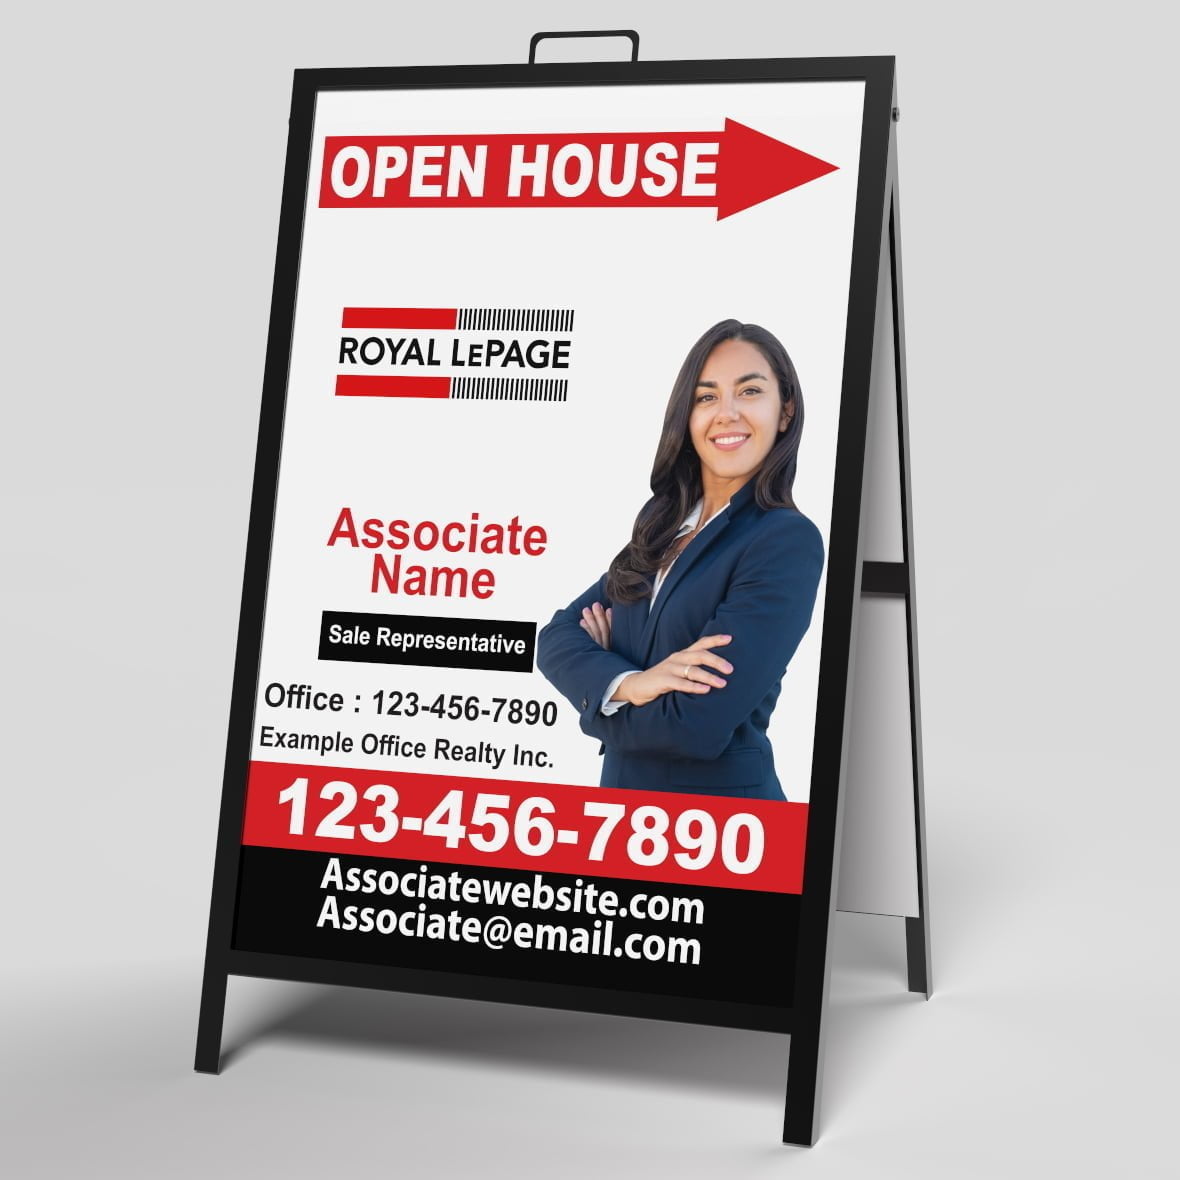 Royal LePage Insert Signs